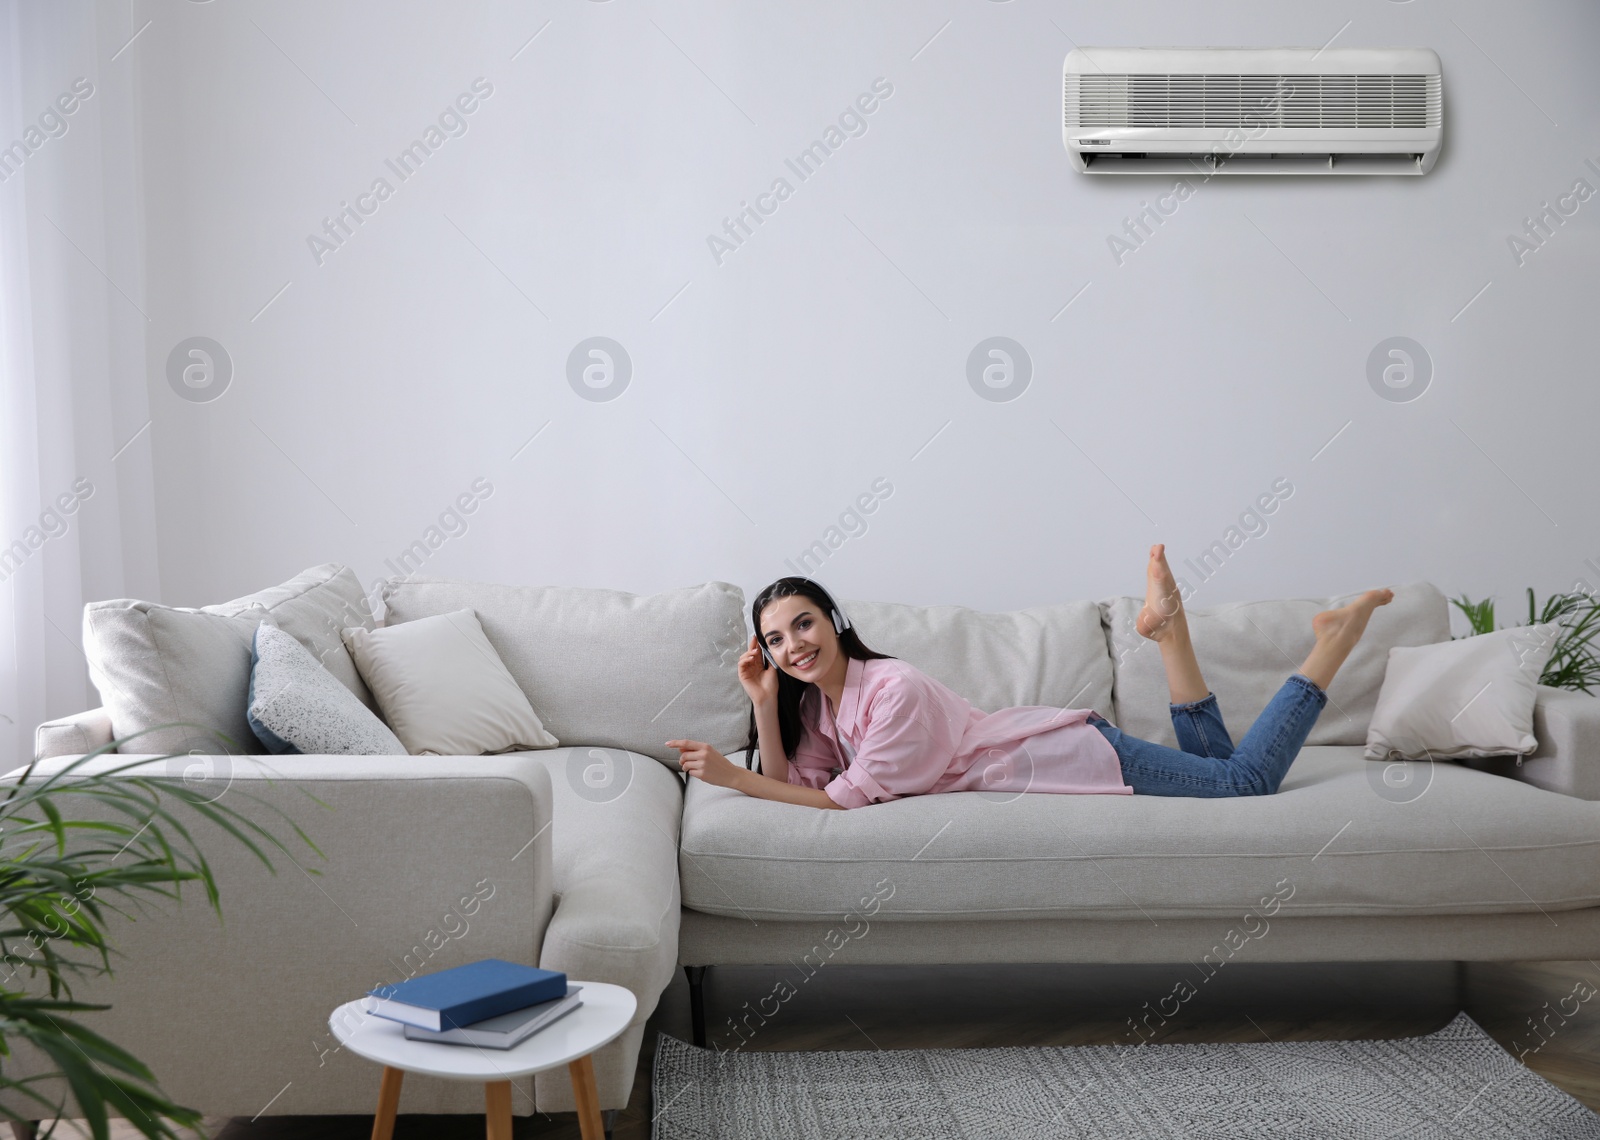 Image of Young woman resting under air conditioner on white wall at home